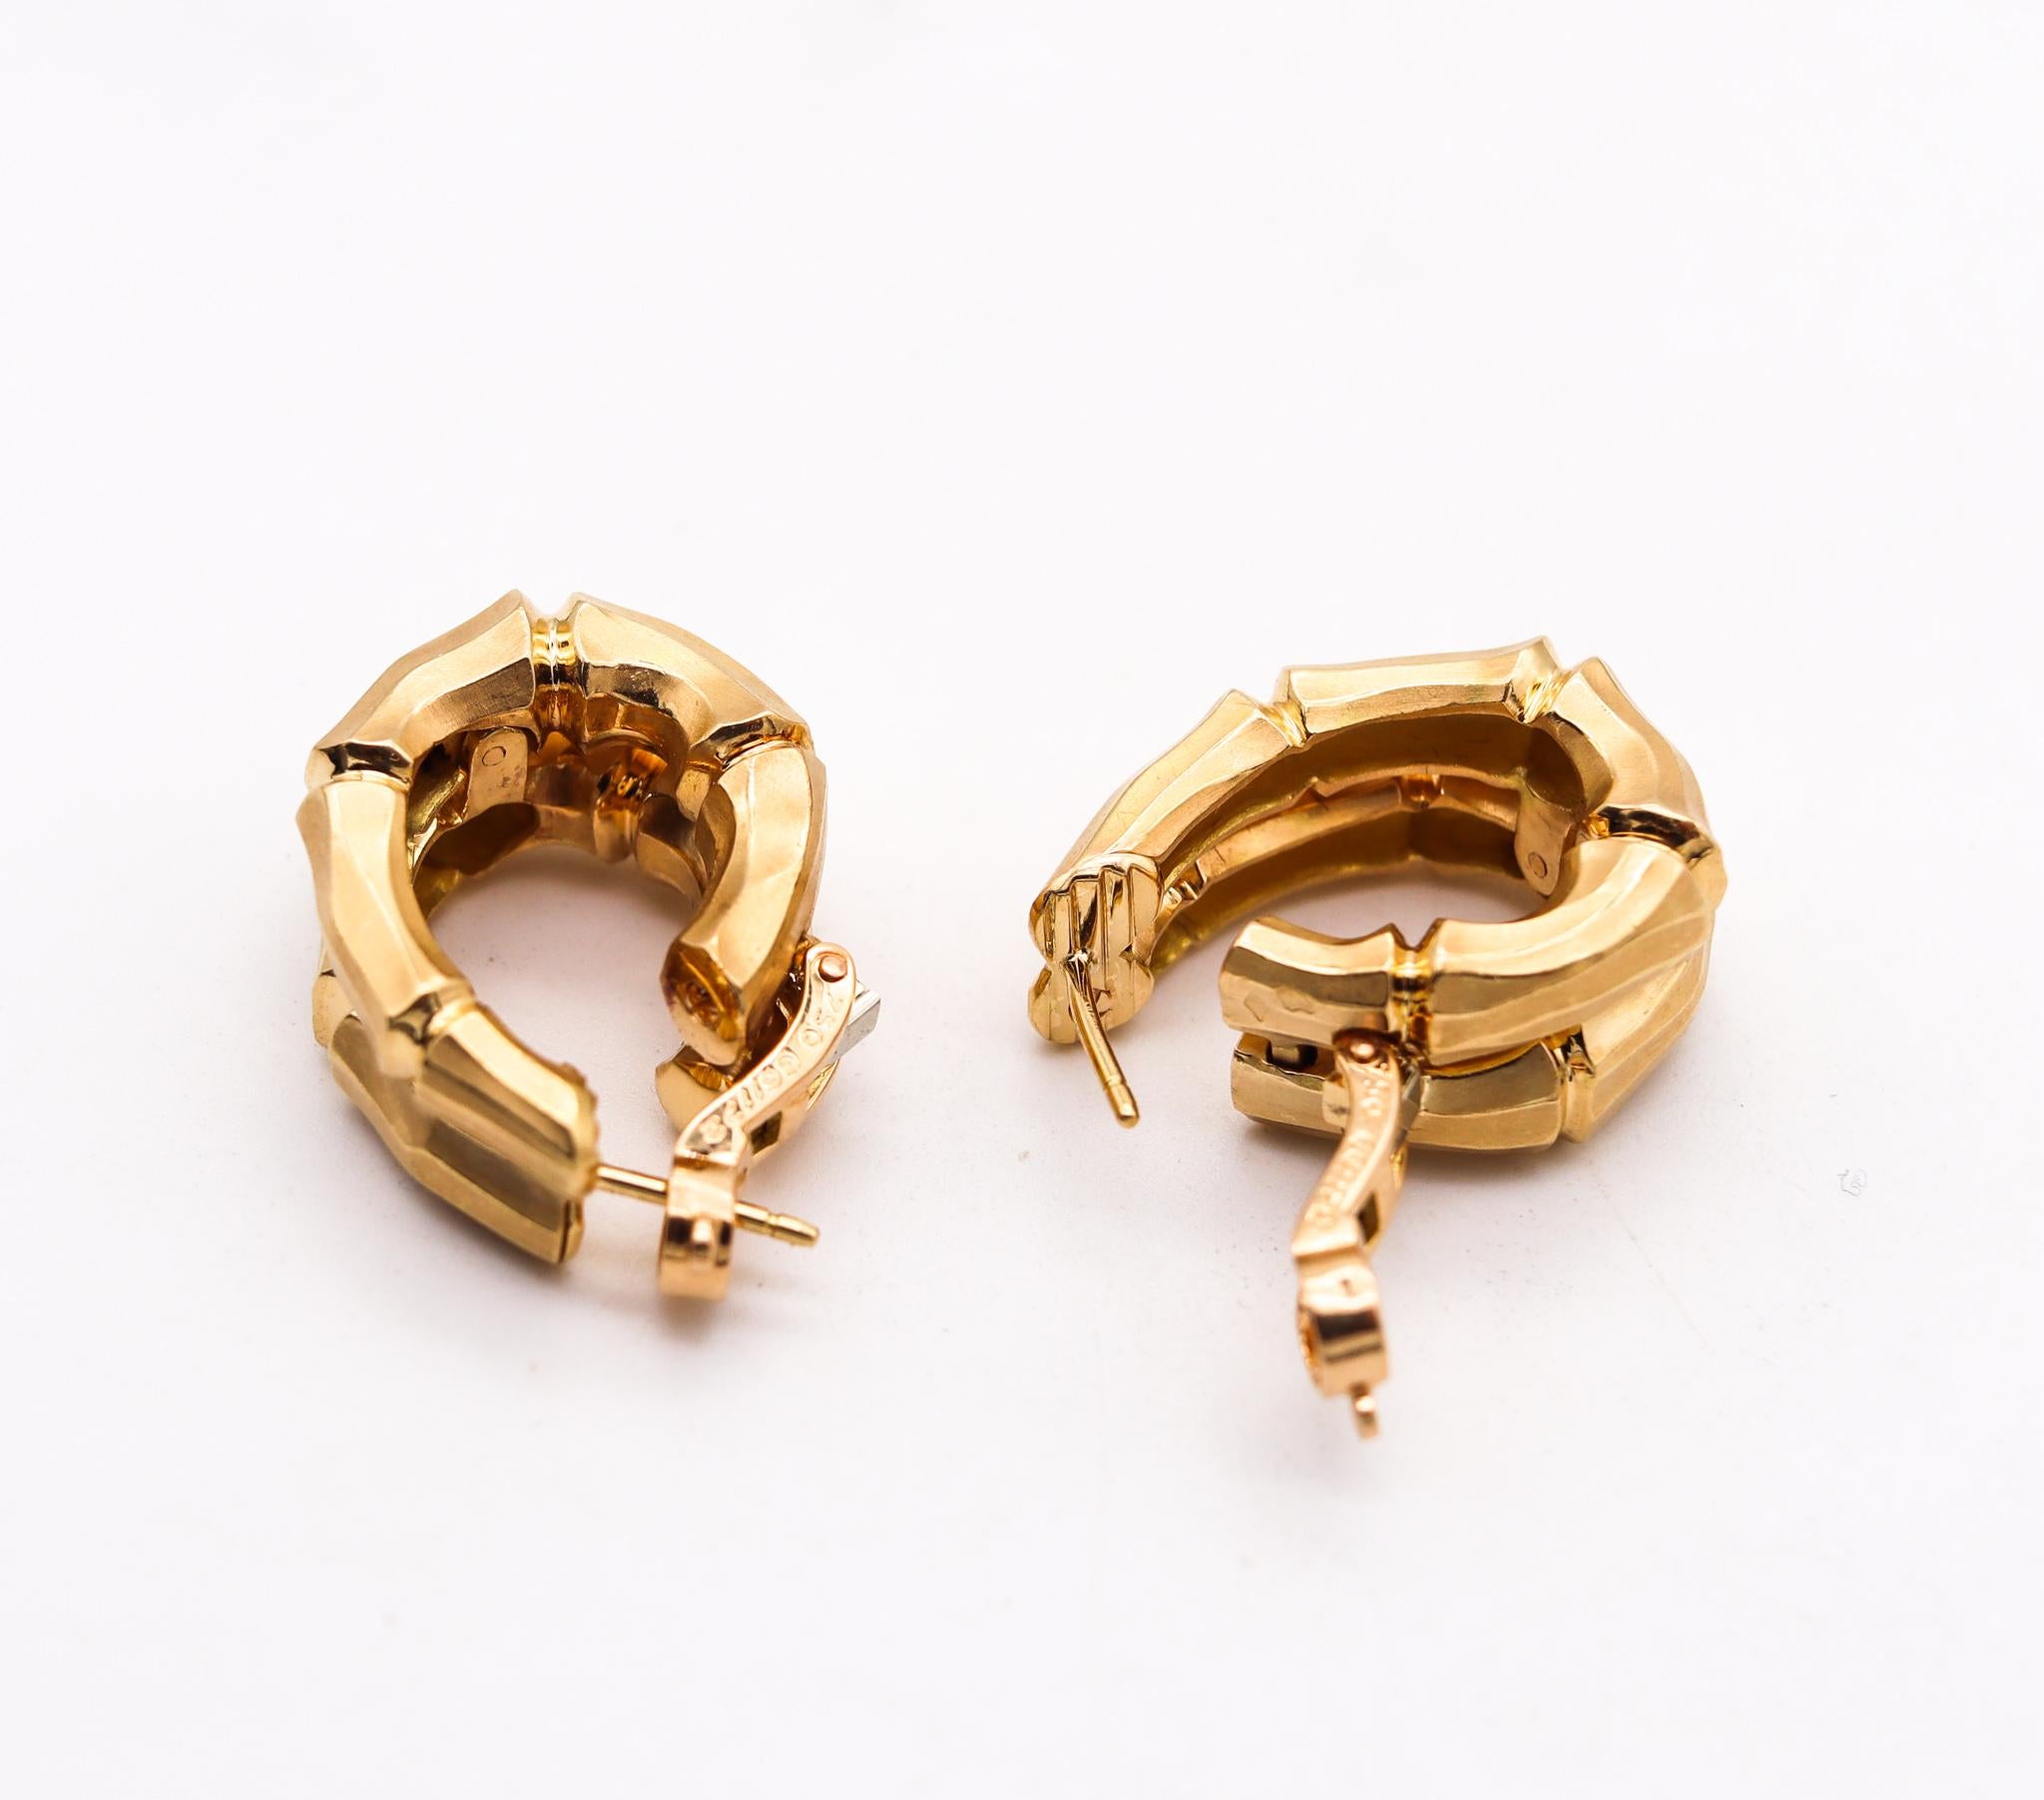 Modernist Cartier Paris 1970 Iconic Double Bamboo Hoop Clips Earrings in 18Kt Yellow Gold